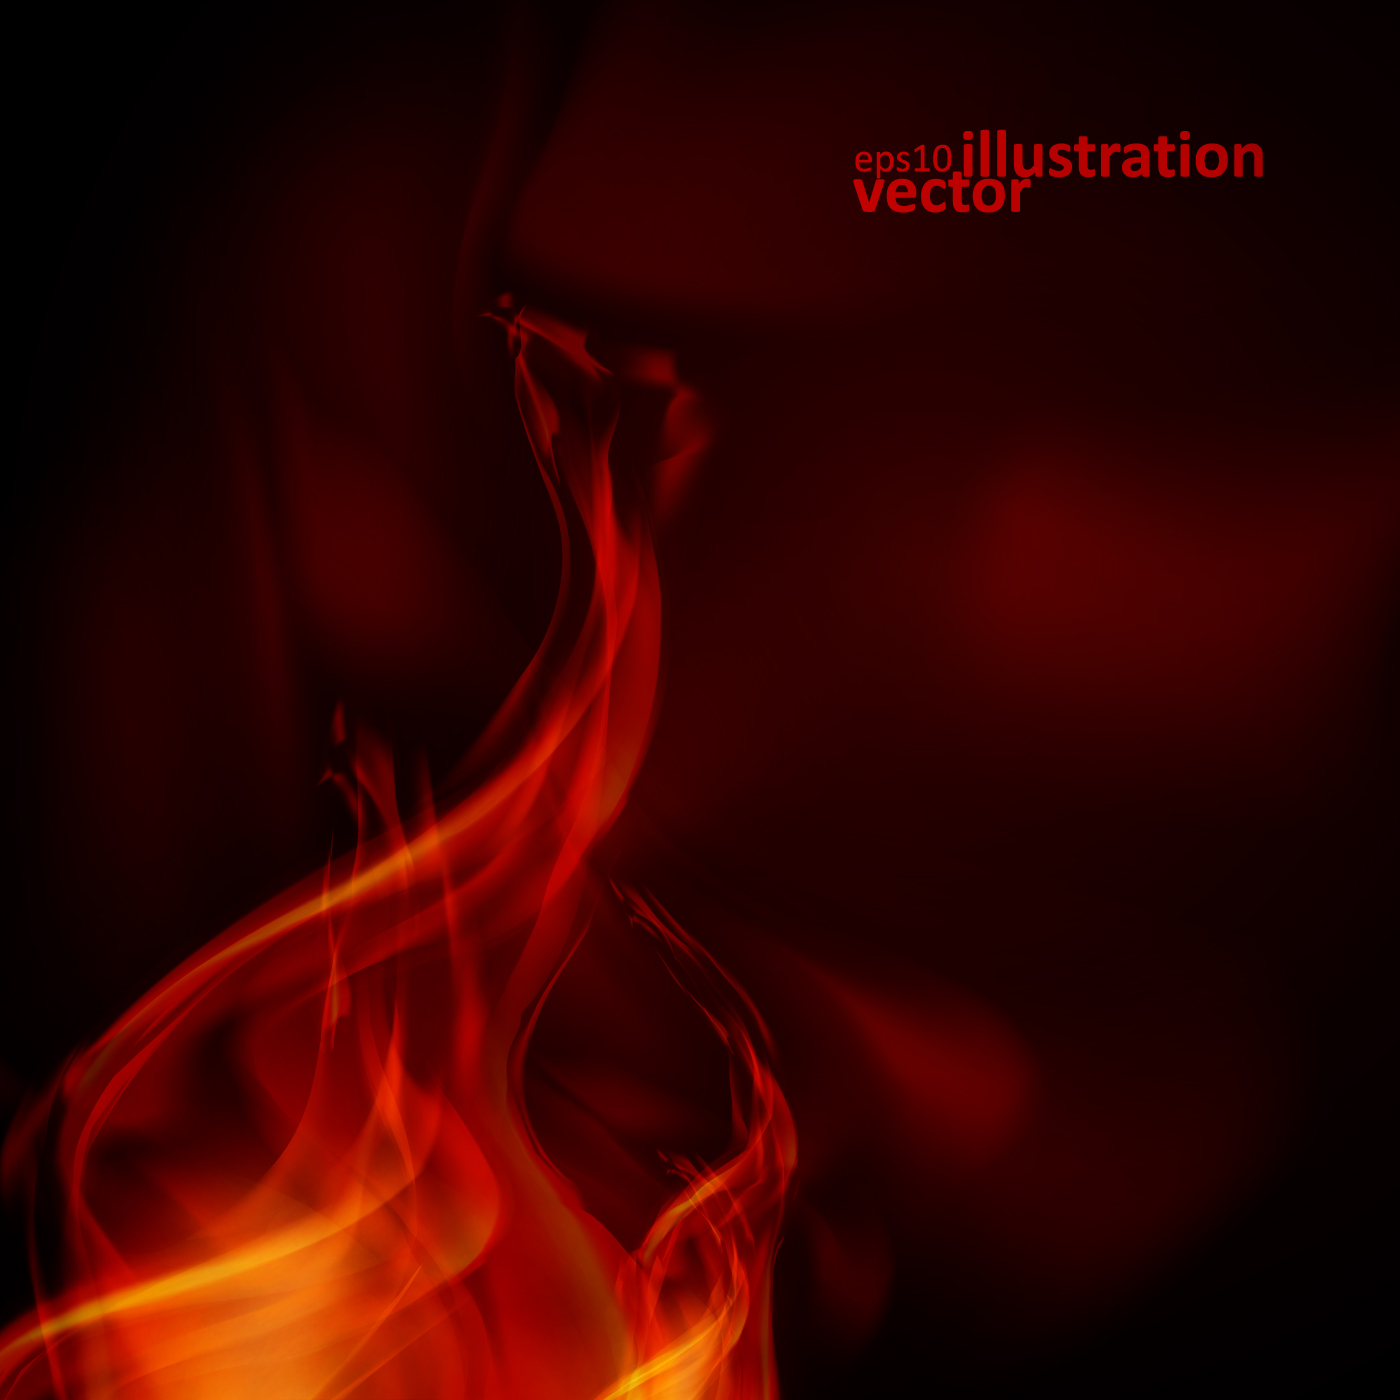 Realistic fiery background illustration vector 04